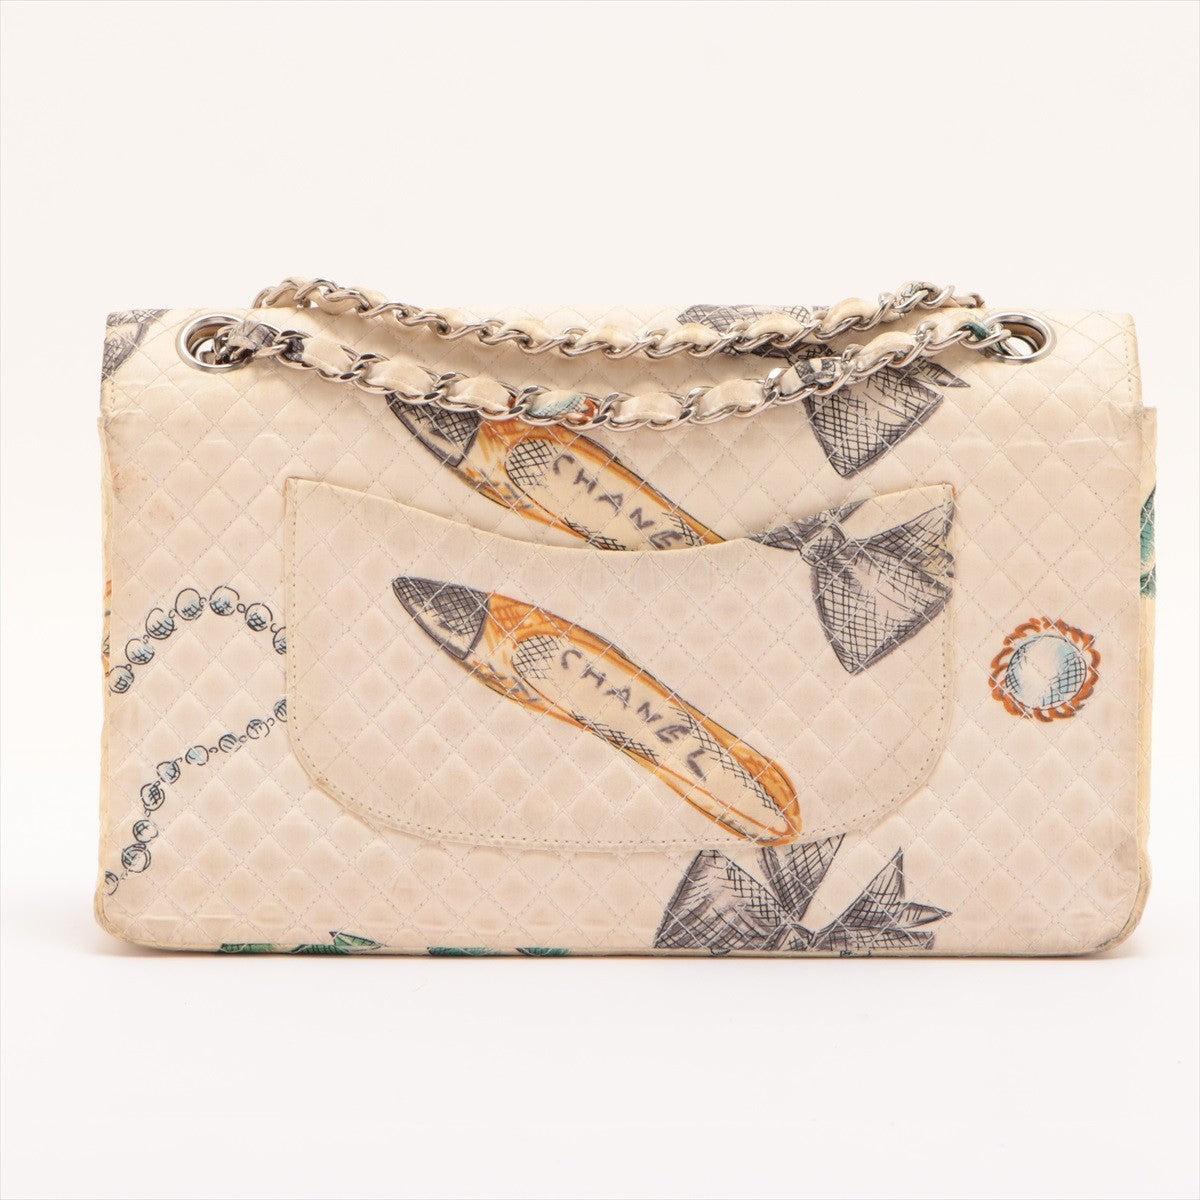 Chanel Classic flap bag features diamond quilted canvas in beige with drawings of some Chanel icons (CC logo, Camelia flowers, bows, pearl necklaces, quilted bags & shoes), silver-tone hardware, CC turn-lock at front, interlaced chain with canvas